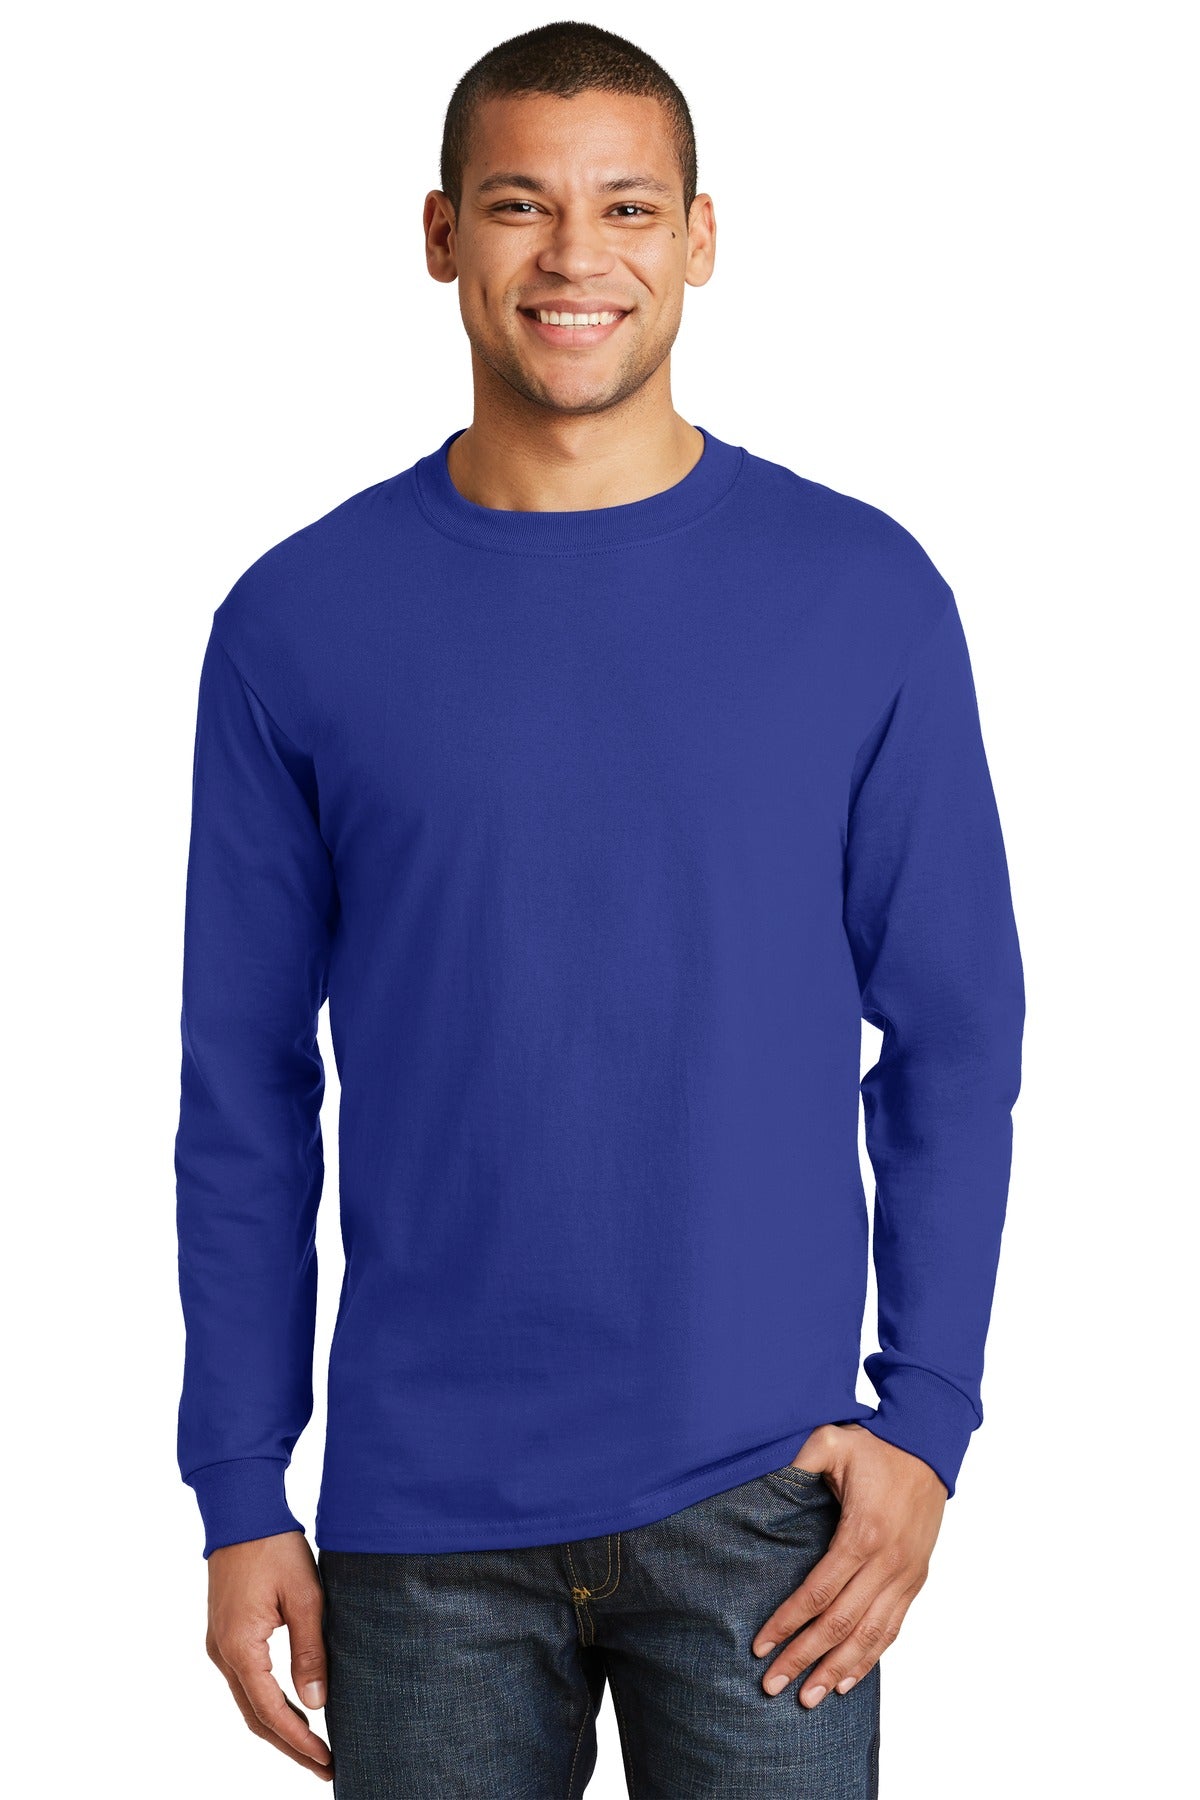 Hanes?Beefy-T?-  100% Cotton Long Sleeve T-Shirt.  5186